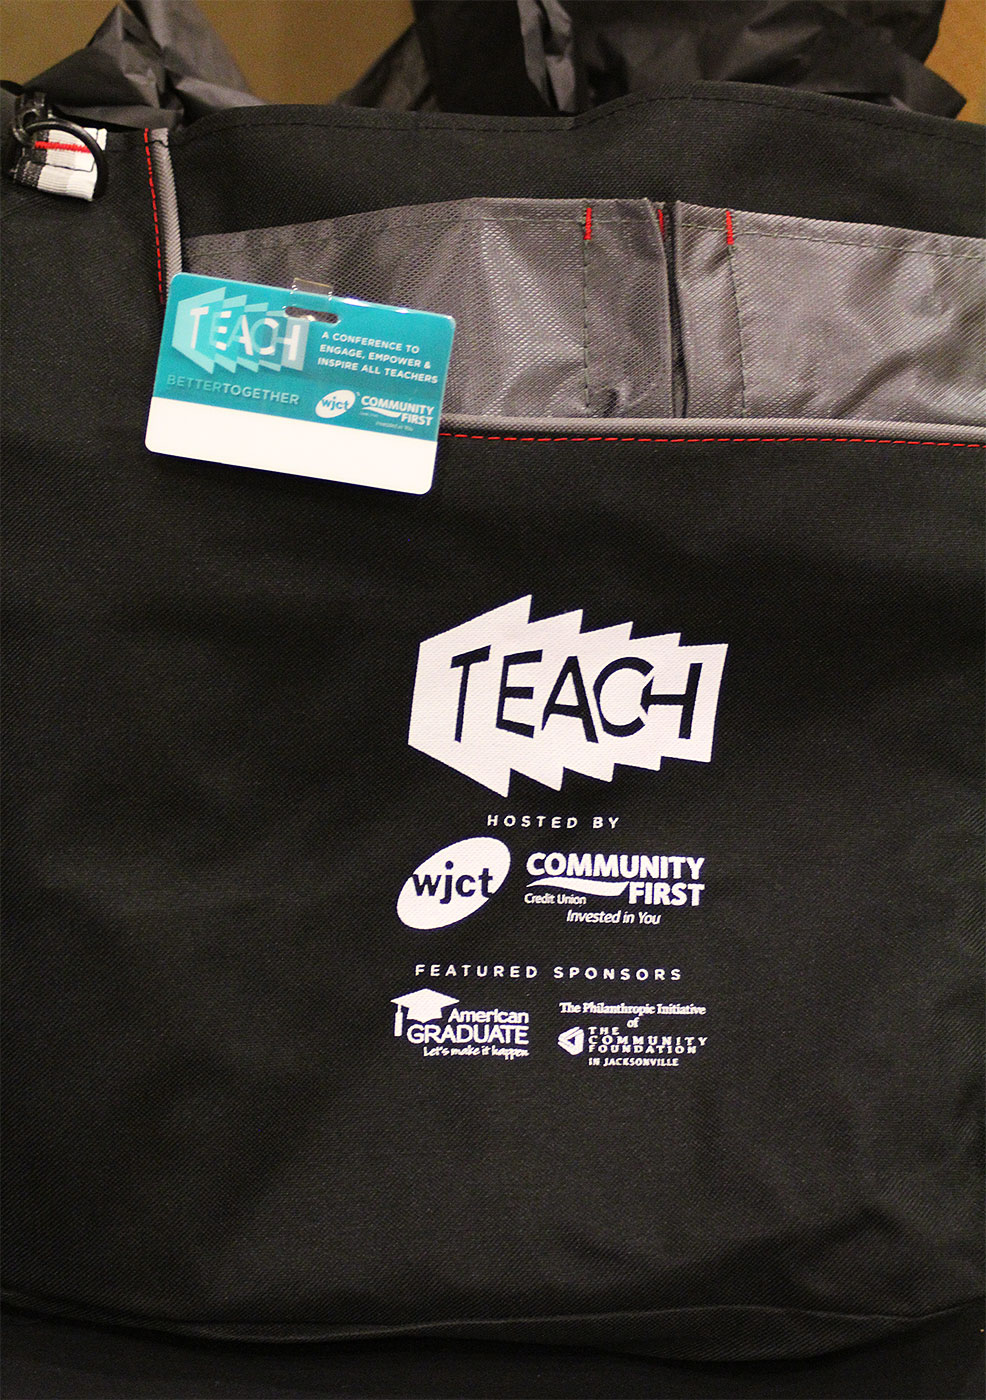 TEACH Conference gift bag and name badge